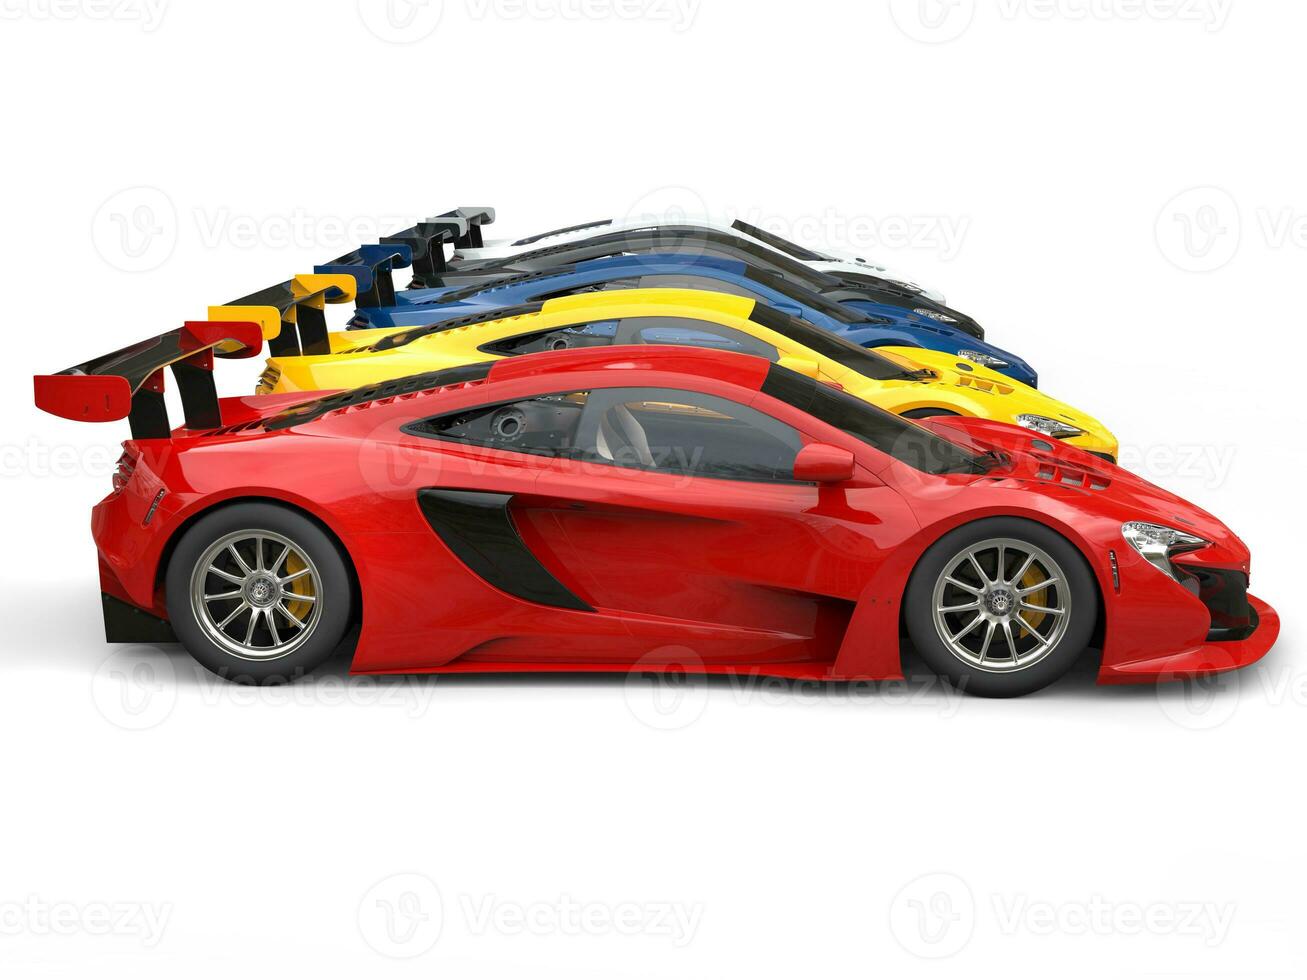 Extreme sports cars in a row - side view photo